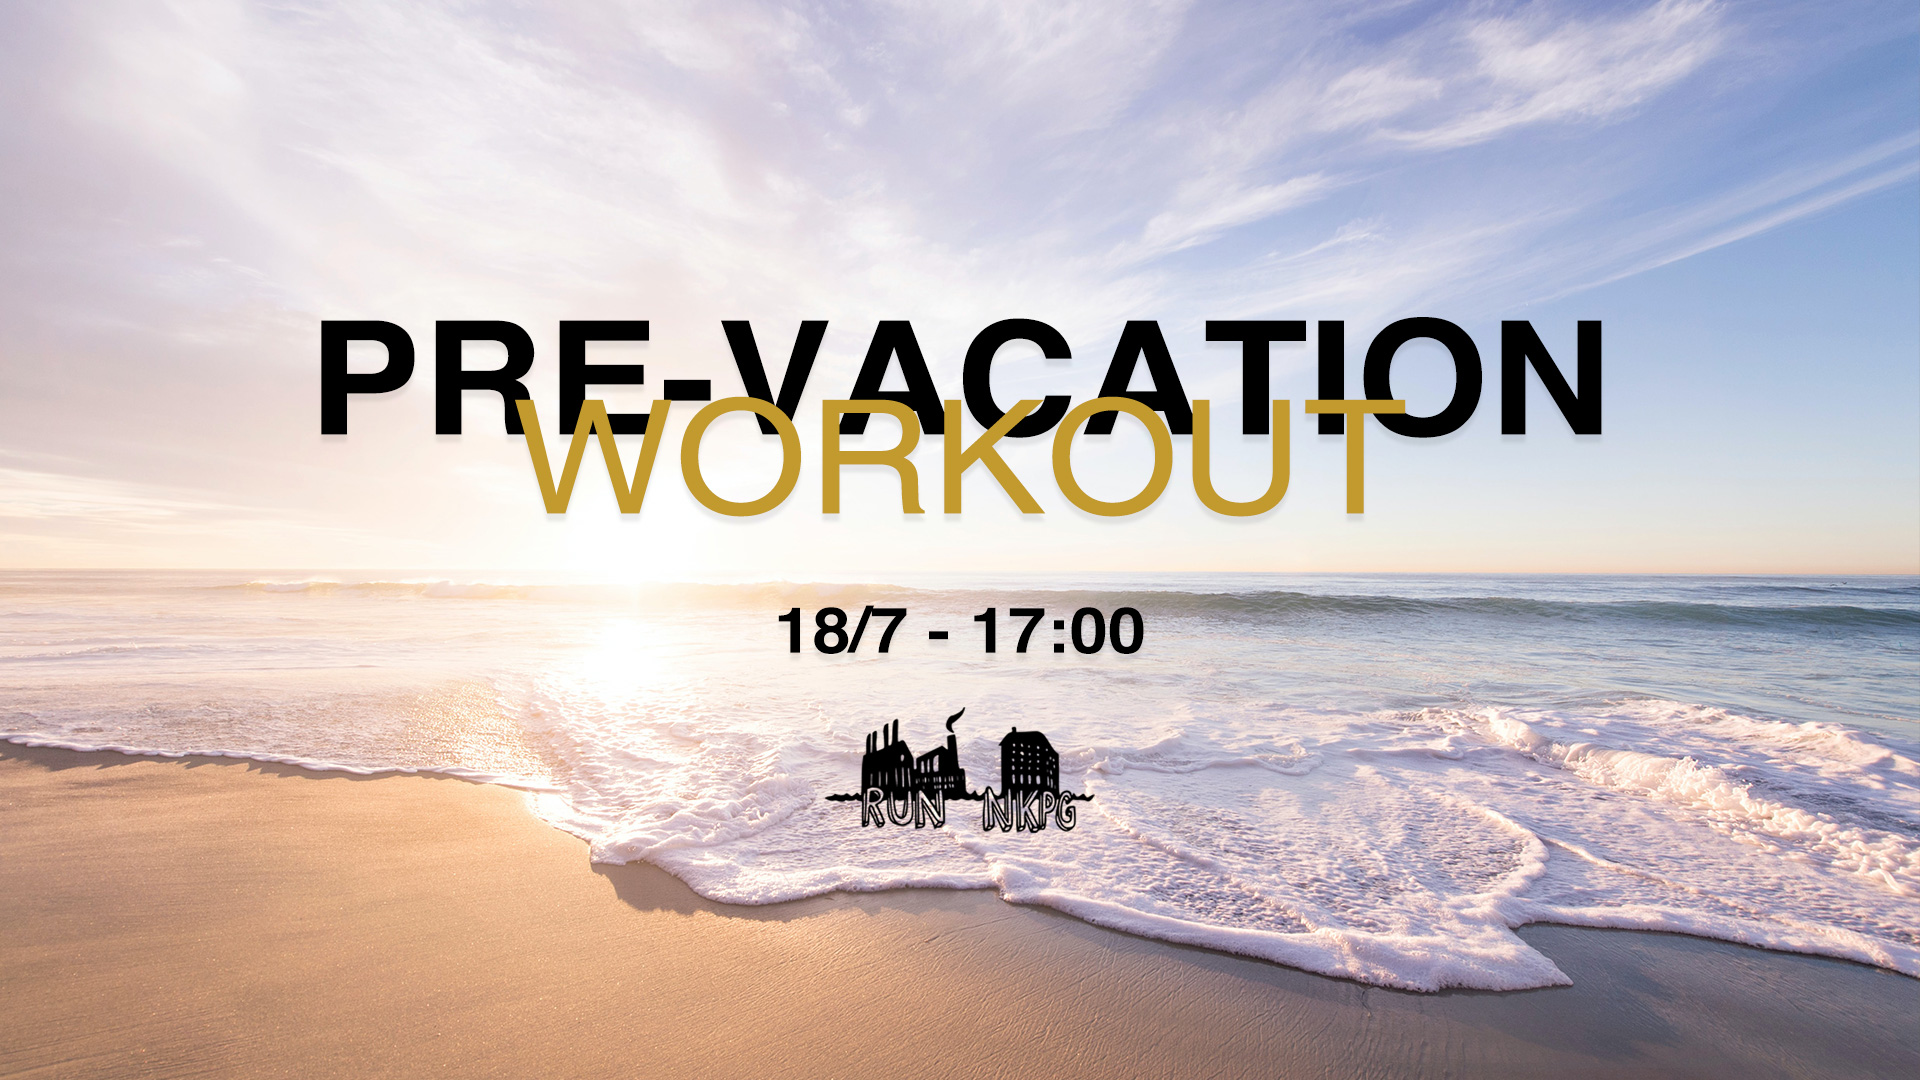 Event 138 - Pre-vacation workout